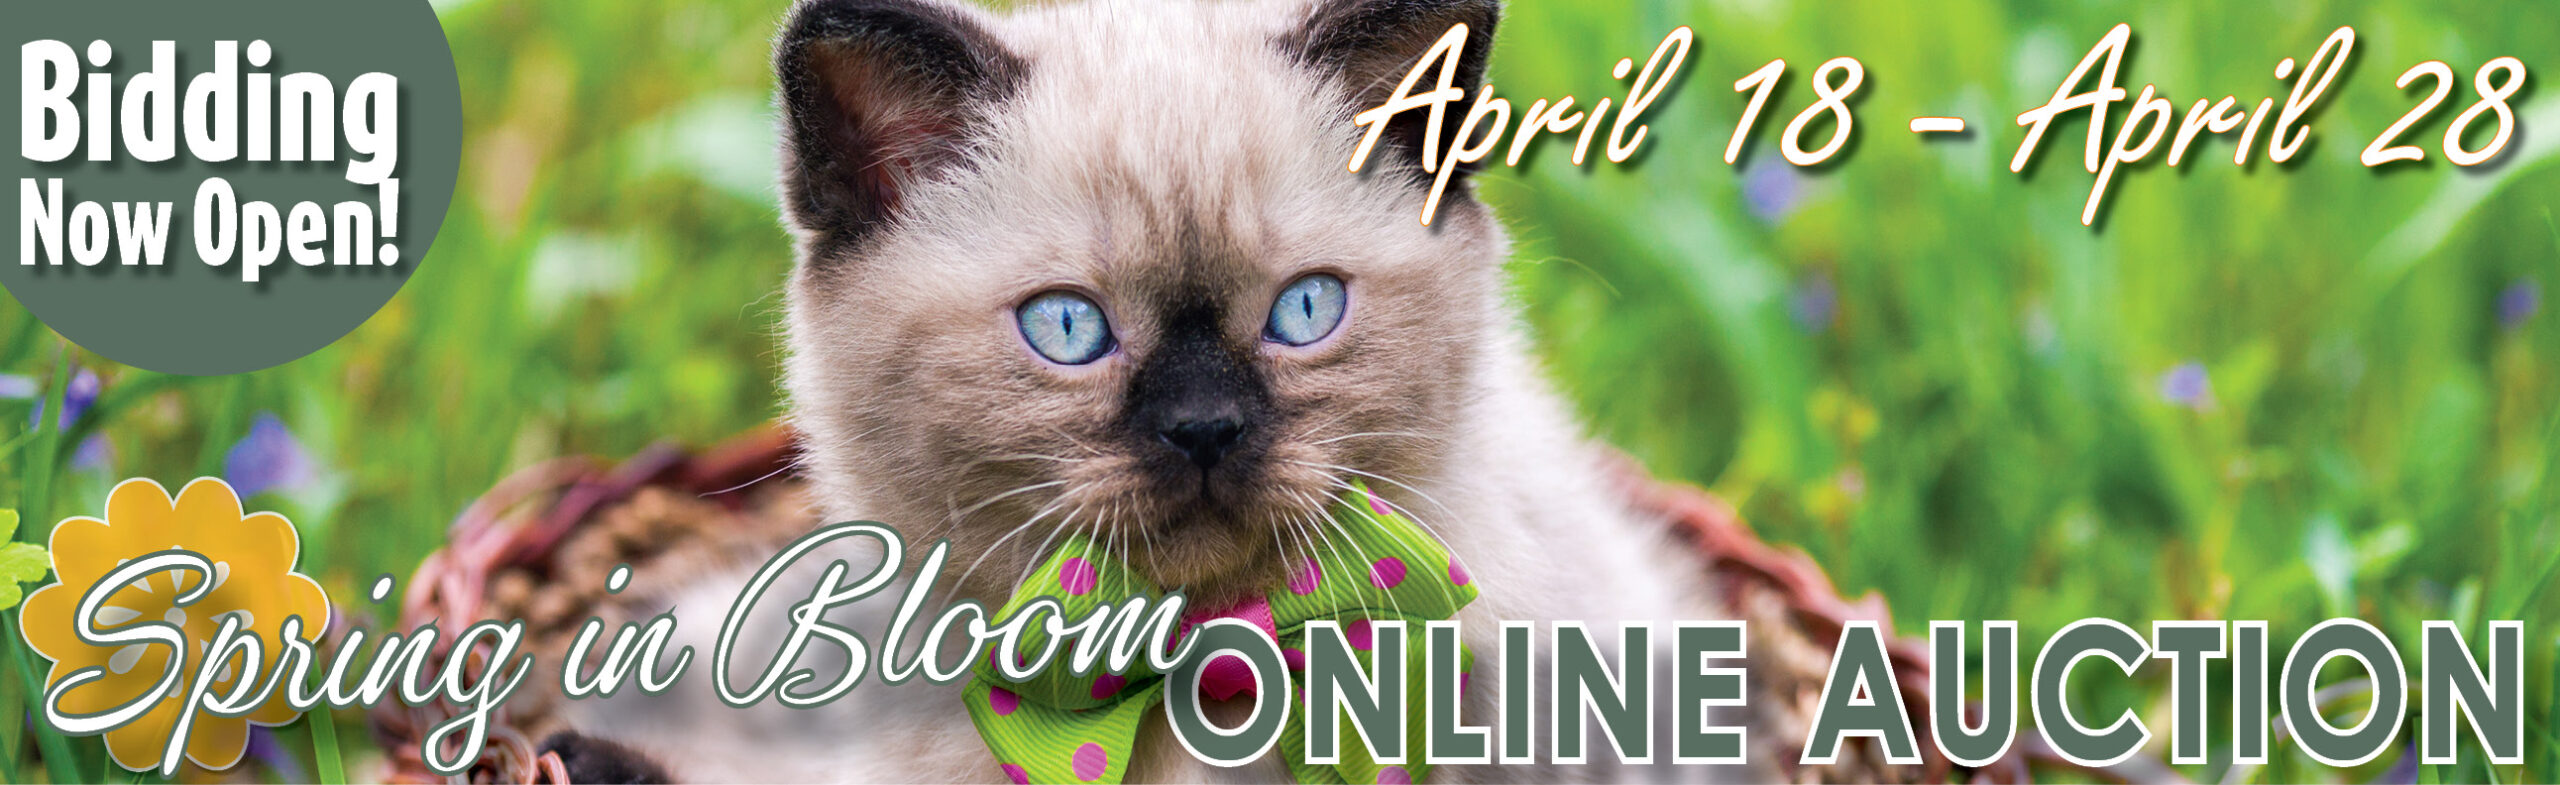 Spring Online Auction! Bidding Now Open! - Heritage Humane